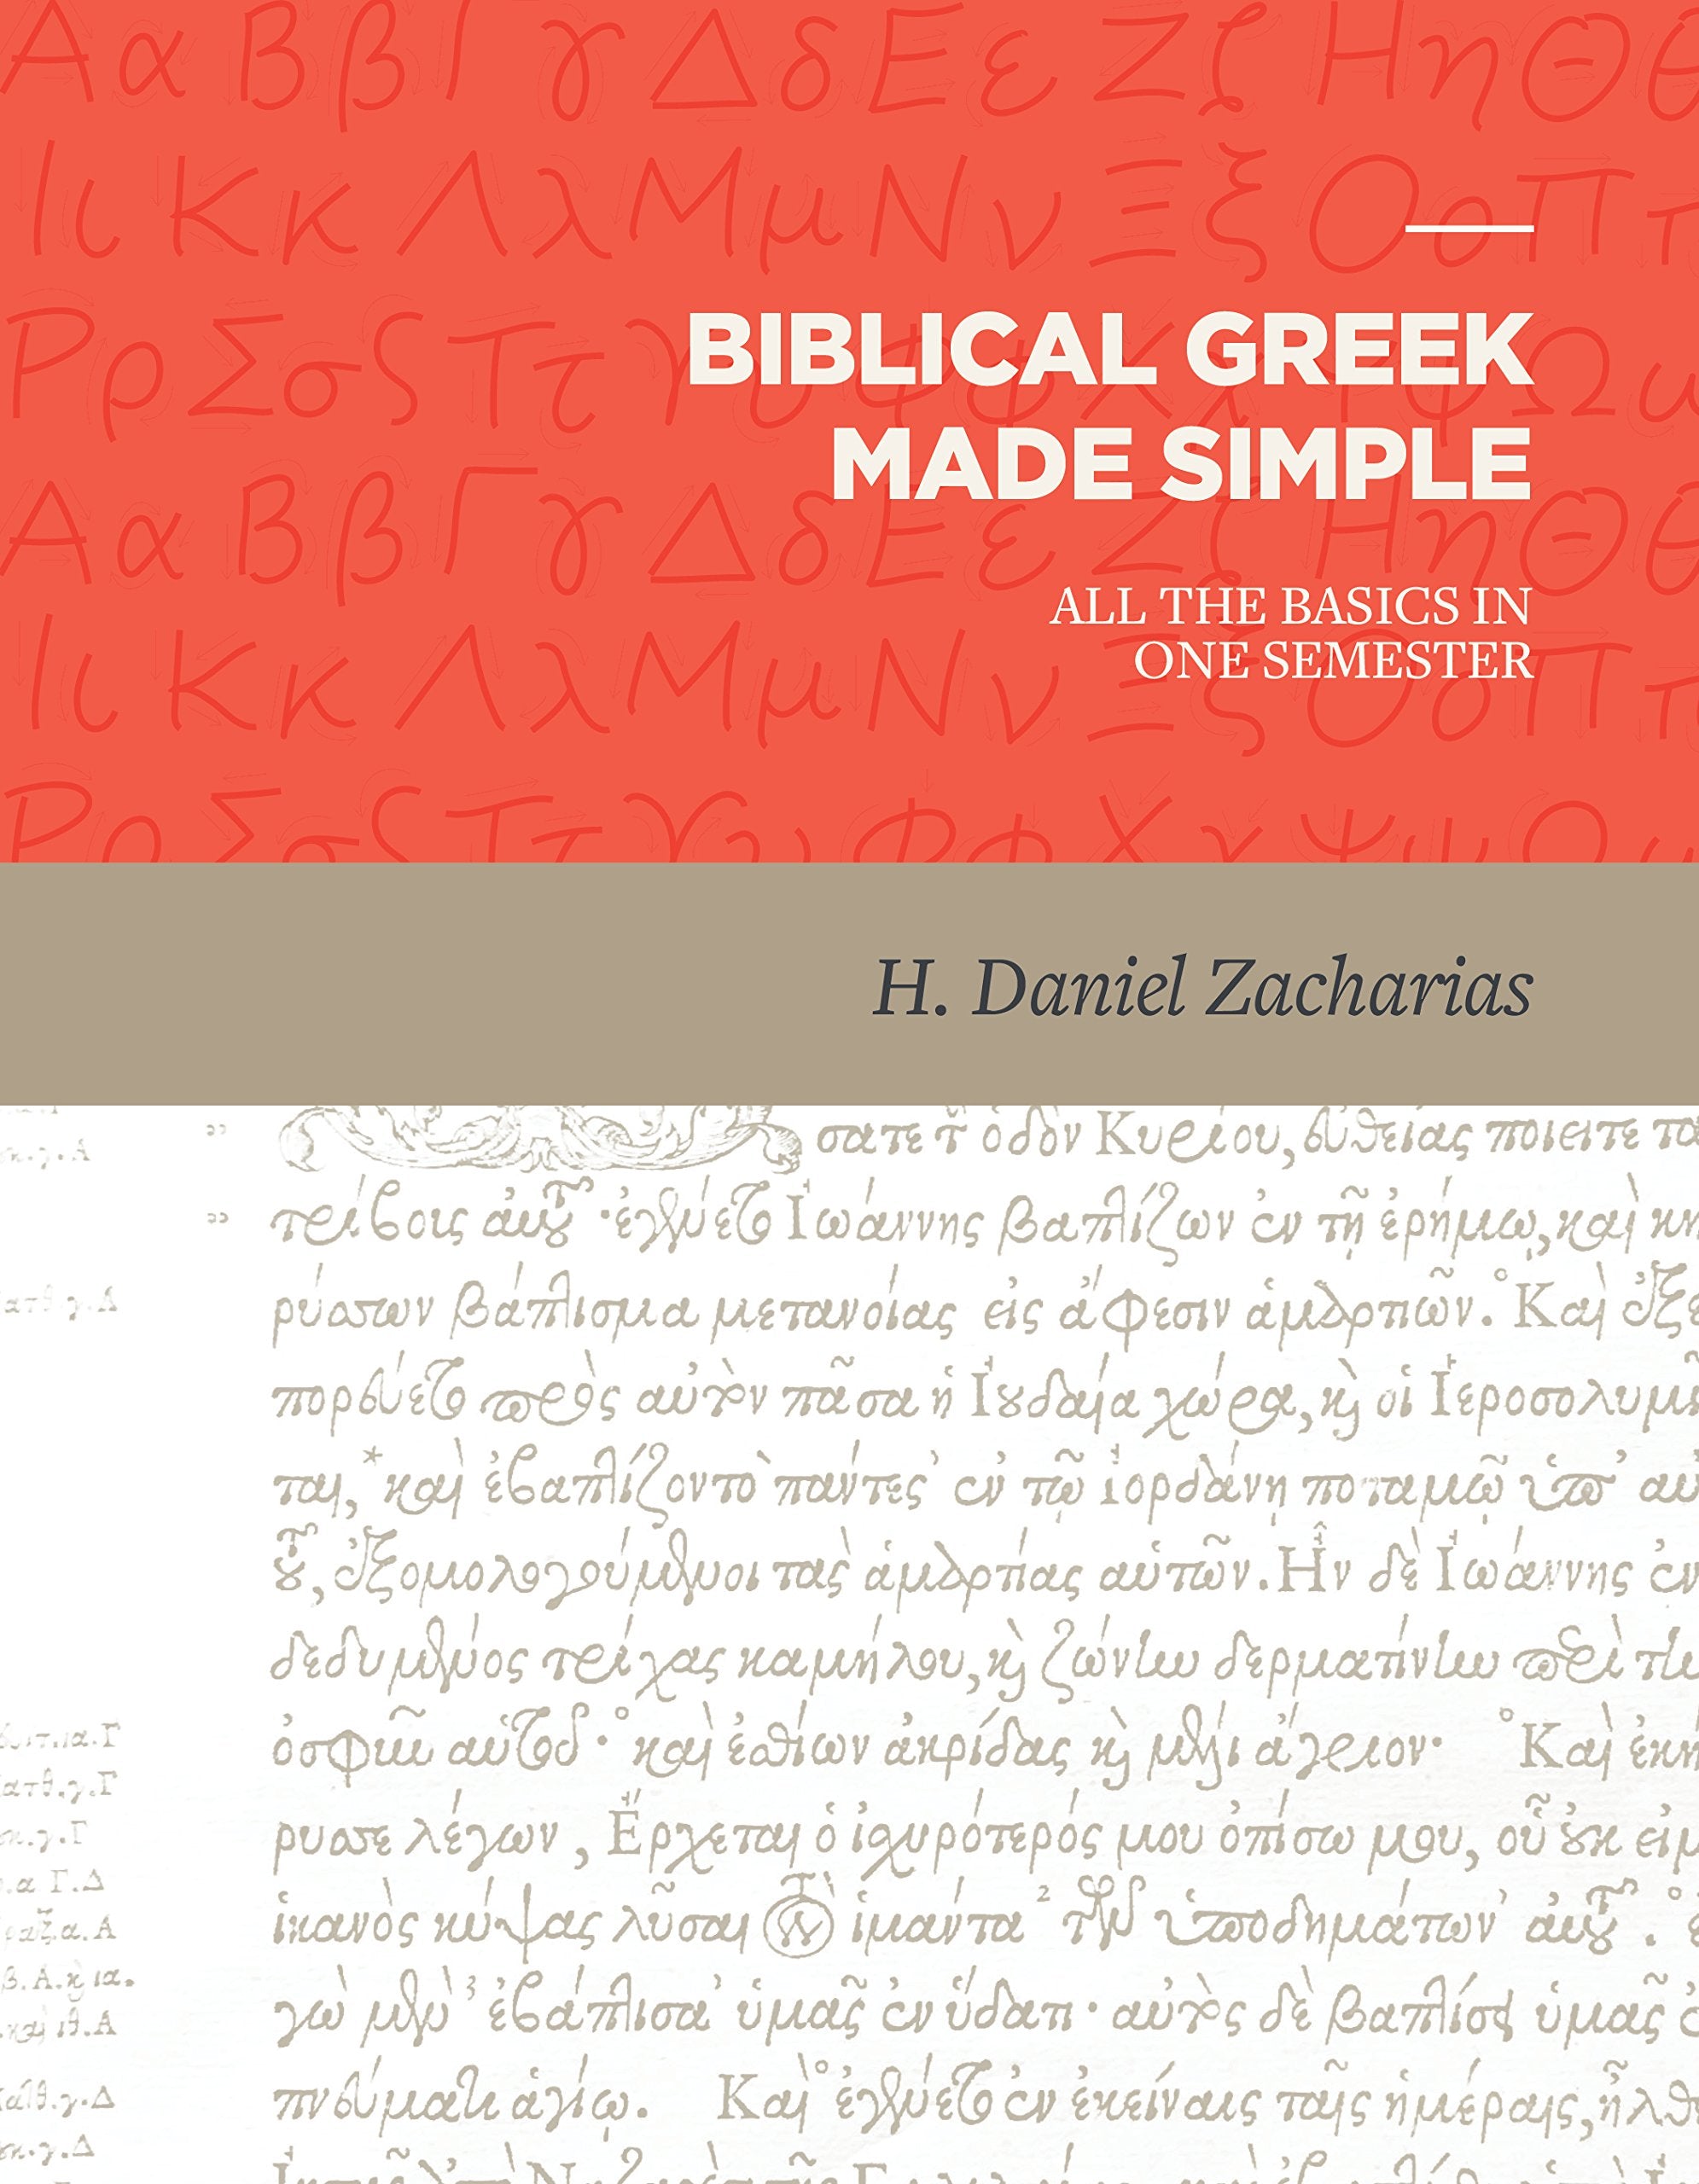 Image of Biblical Greek Made Simple: All the Basics in One Semester other